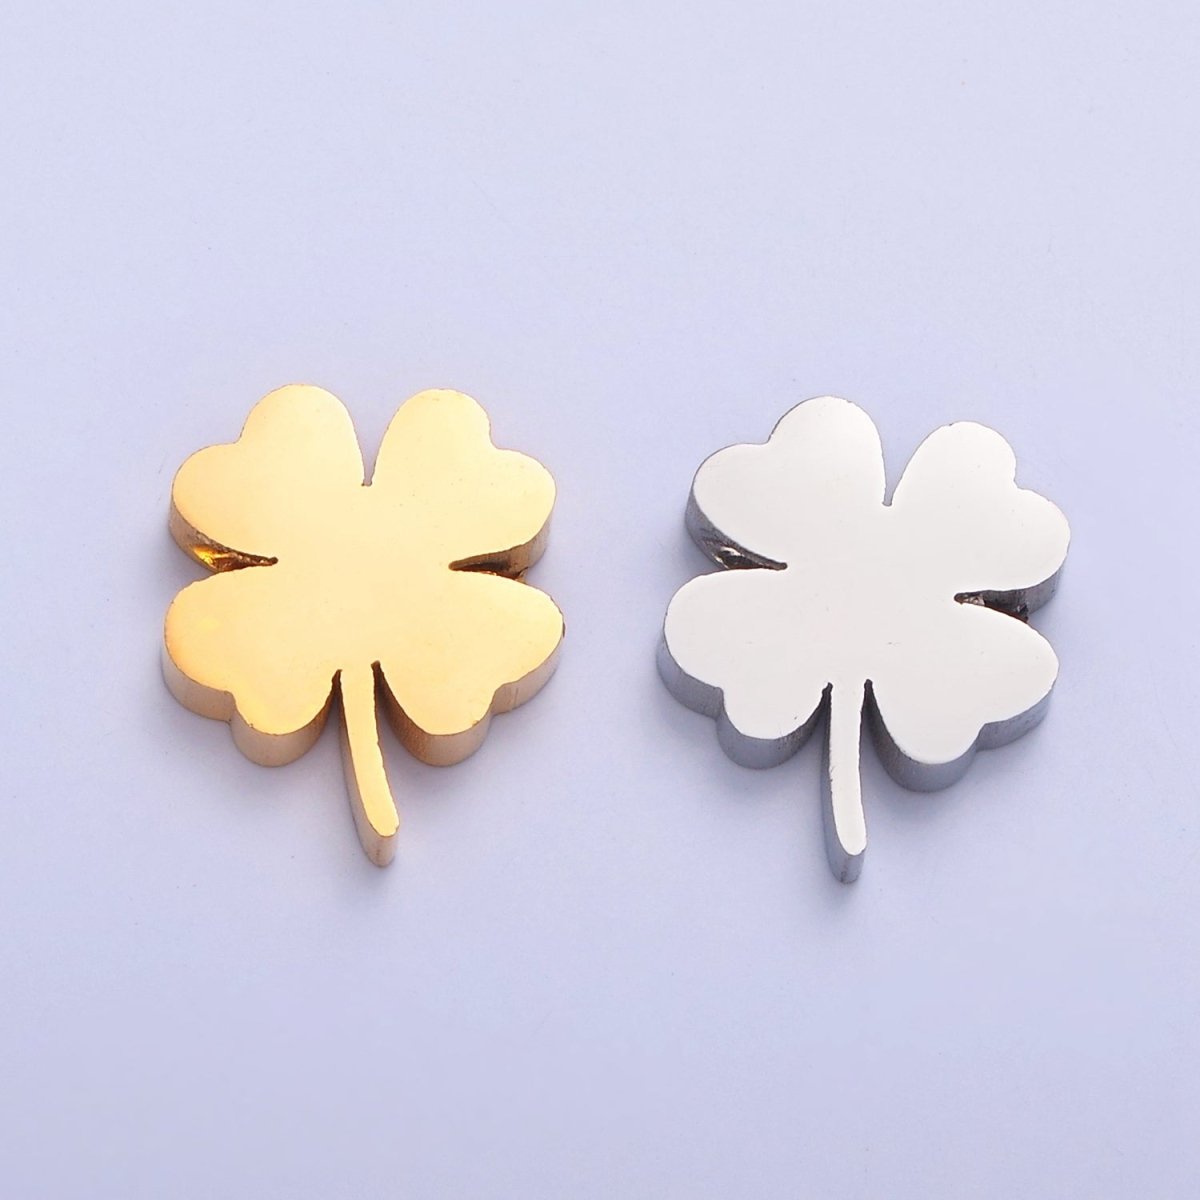 Lucky Clover Stainless Steel Beads. Minimalist Lucky Bead Jewelry Component For DIY Jewelry Making, W-843 W-844 - DLUXCA